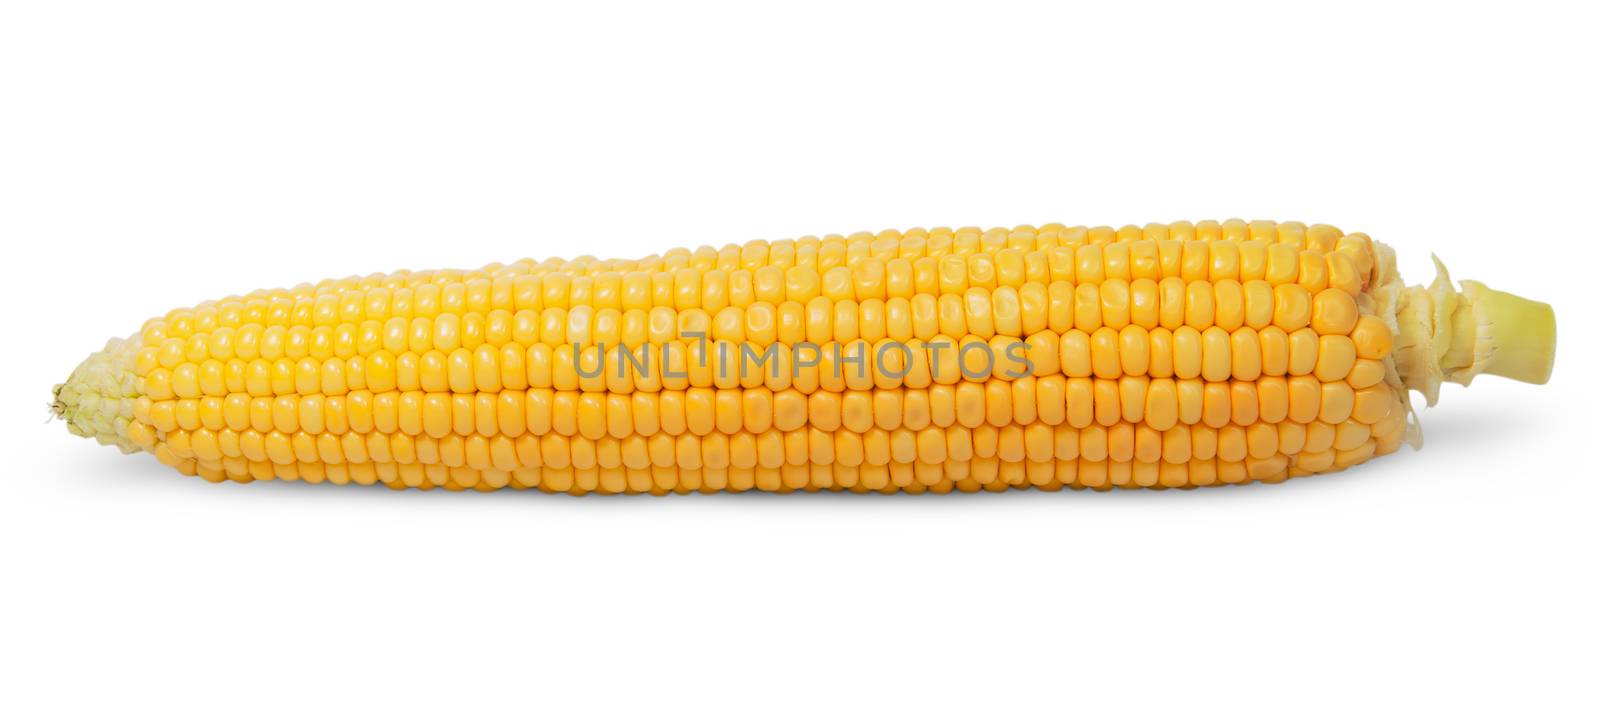 Purified ear of corn isolated on white background